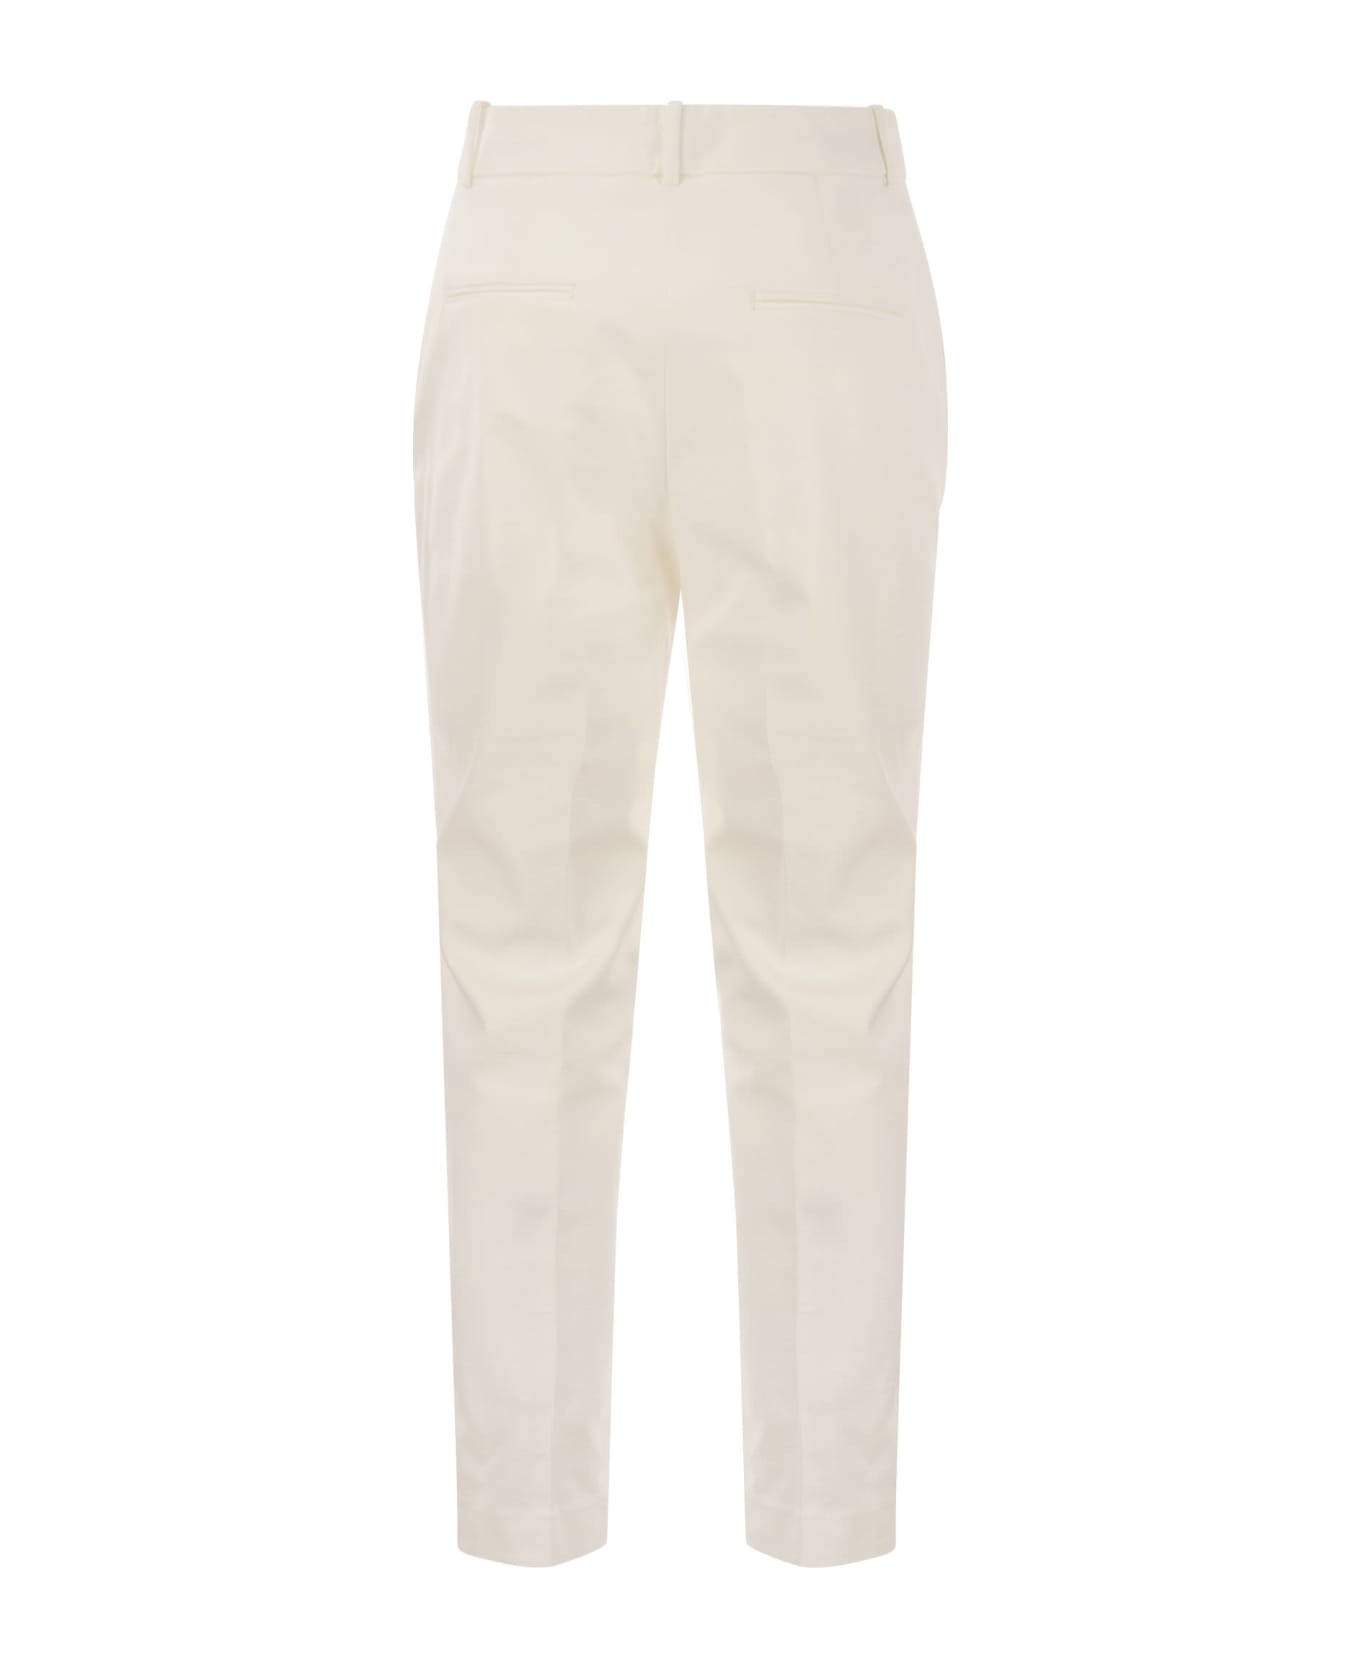 Peserico Iconic Fit Trousers In Comfort Cotton Satin - White ボトムス